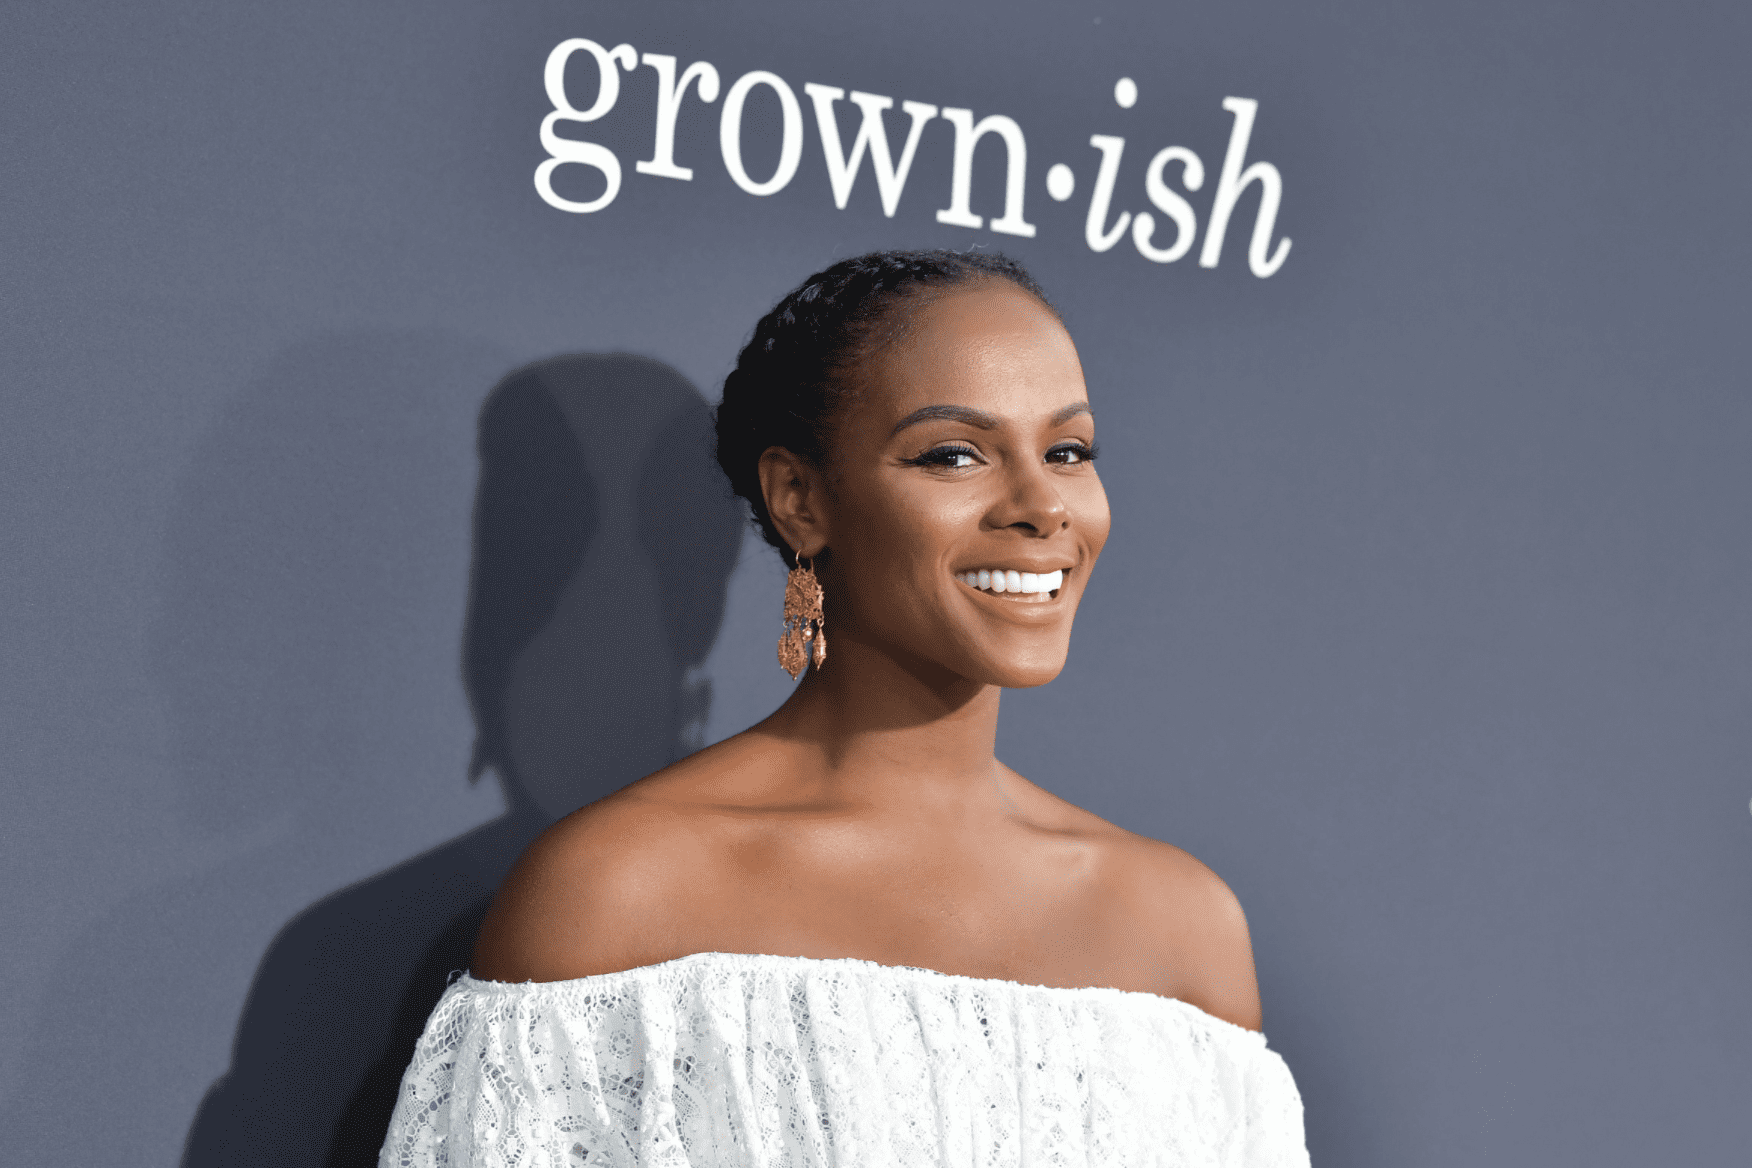 Tika Sumpter at POPSUGAR X ABC's "Embrace Your Ish" Event at Goya Studios on September 17, 2019 | Photo: Getty Images